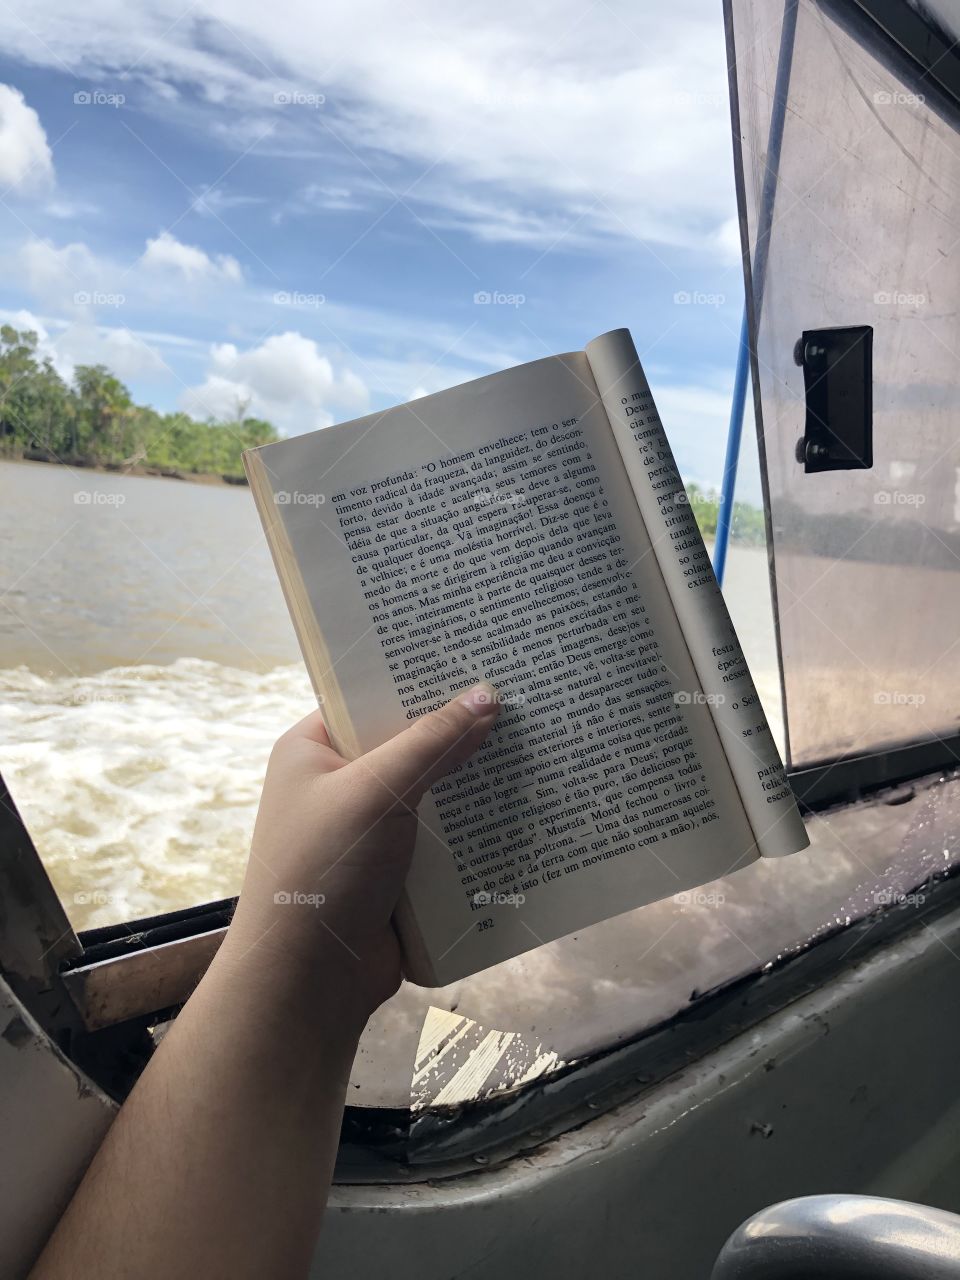 #1 Hobby: reading by the boat. 